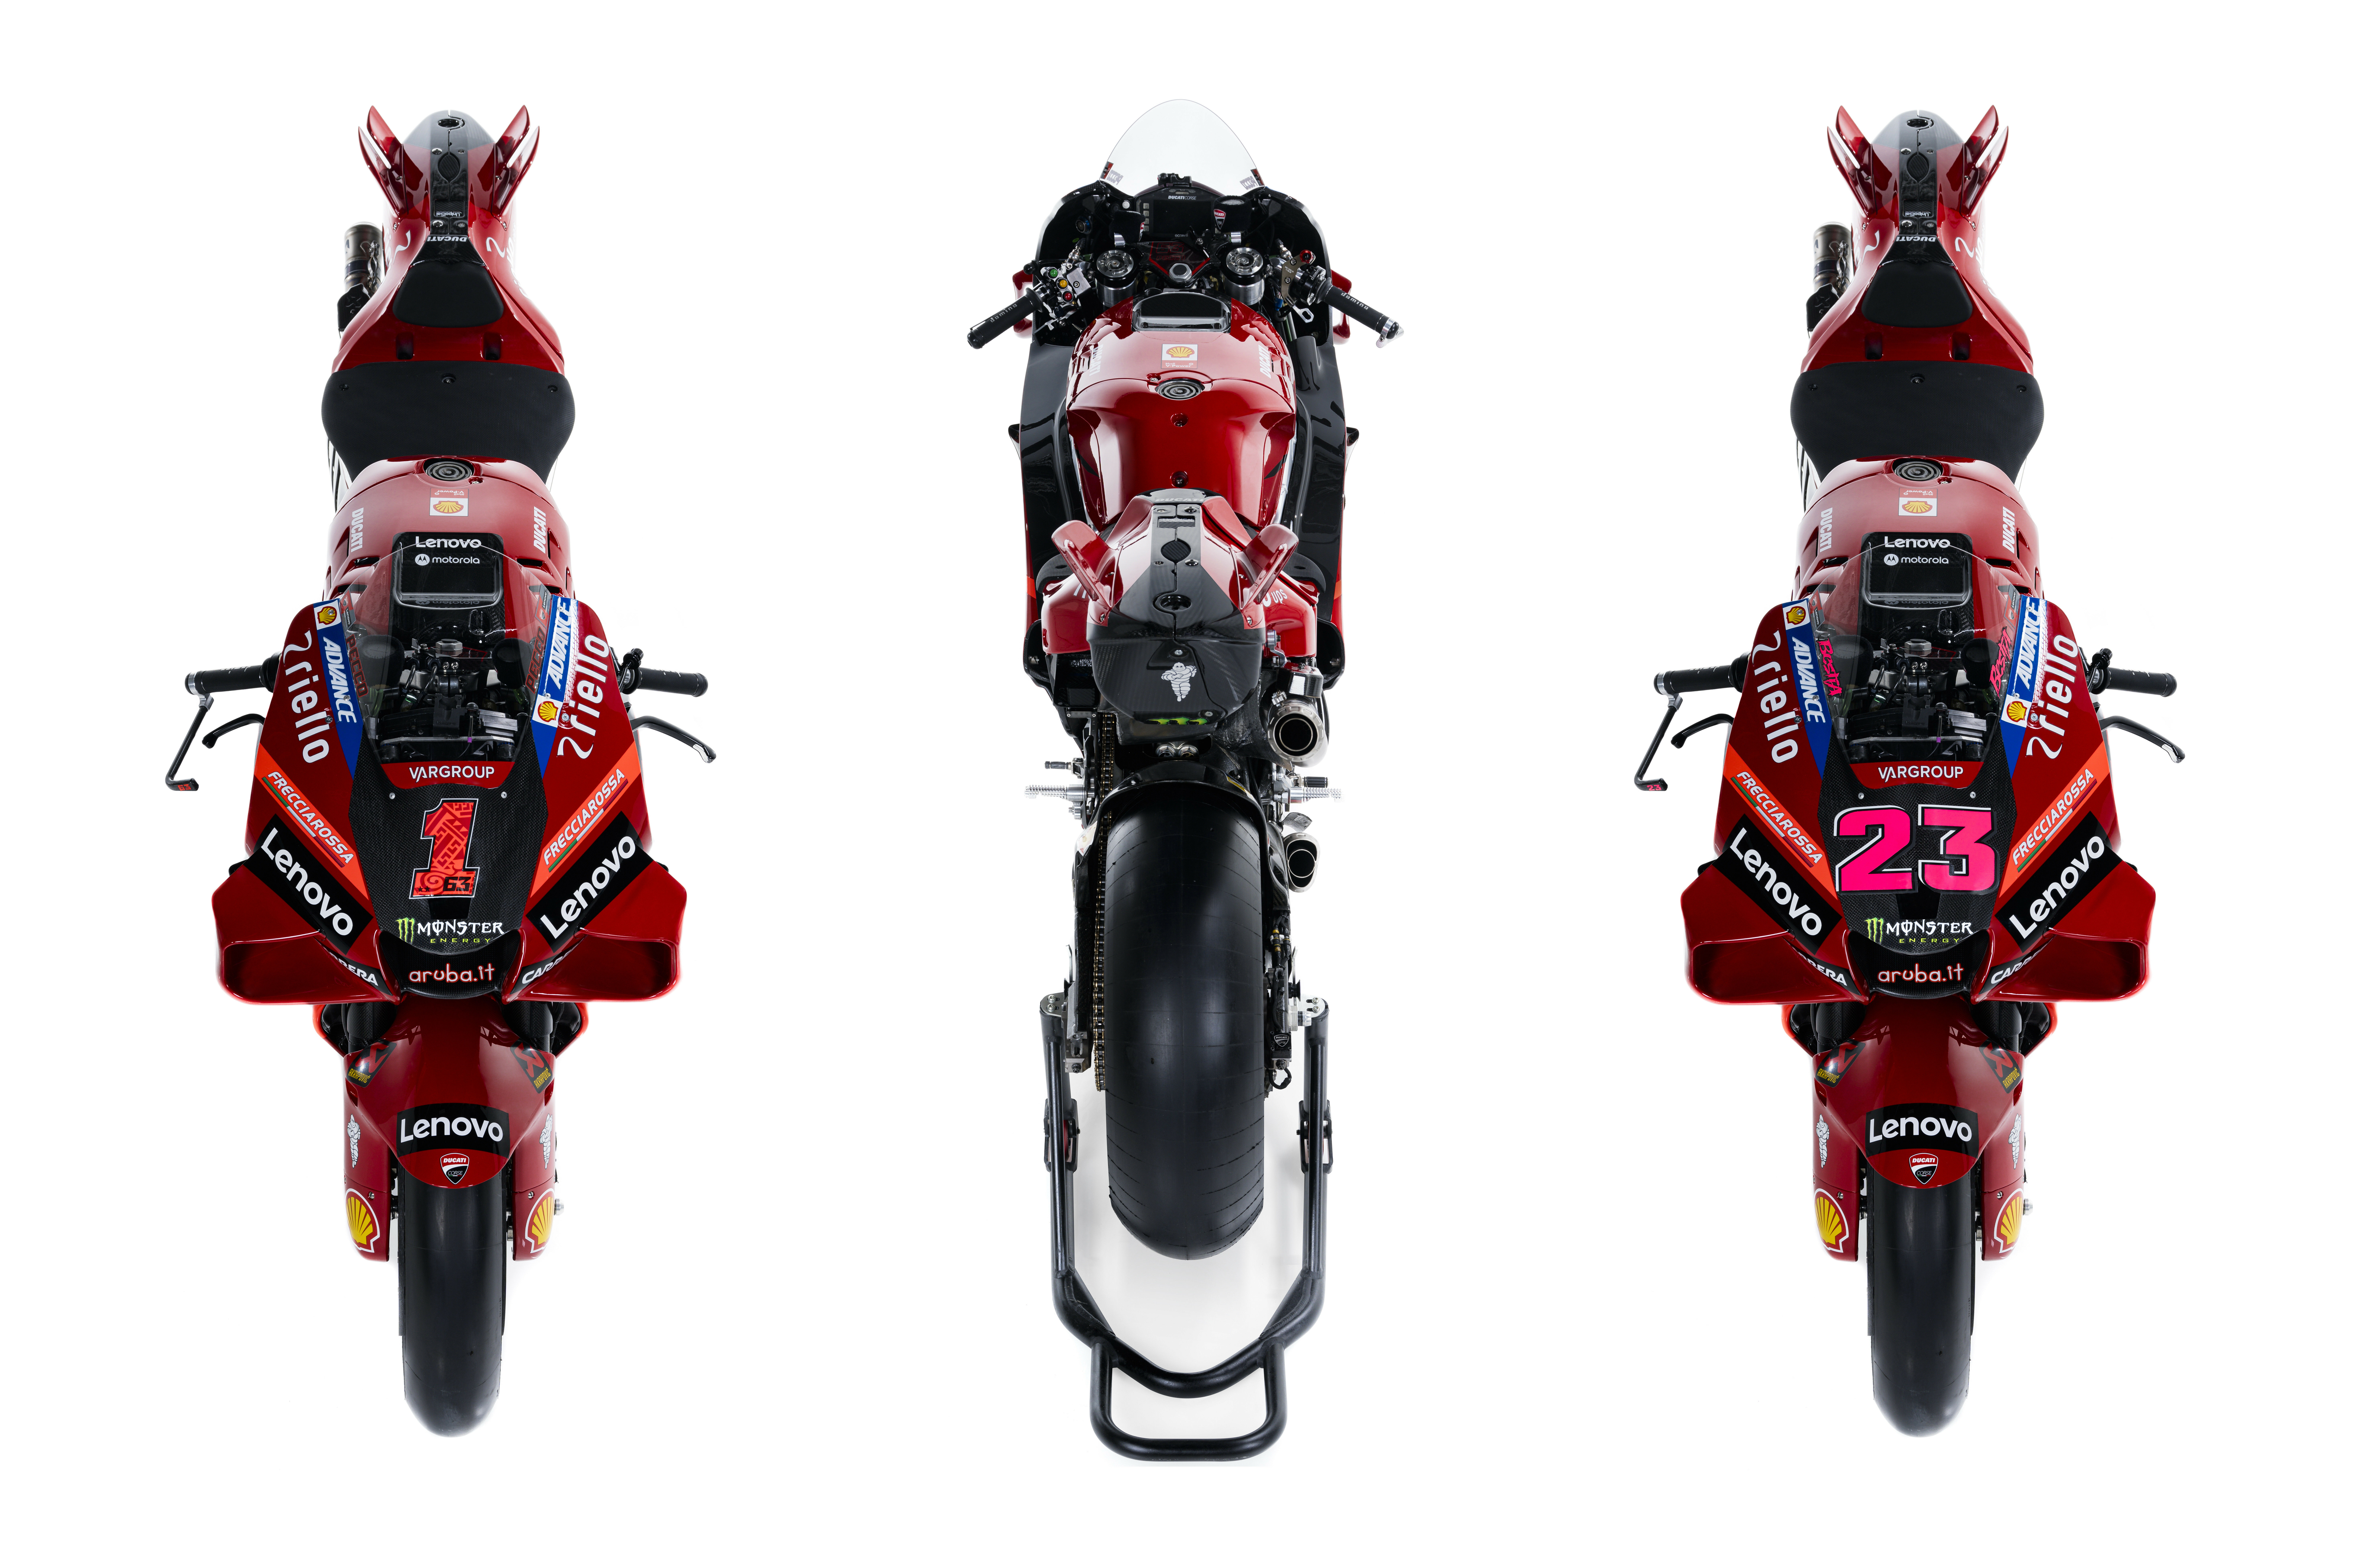 An overhead view of the factory Ducati Desmosedici GP23s. The bike in the middle has Bagnaia's stickers on the windscreen. Photo courtesy Ducati.